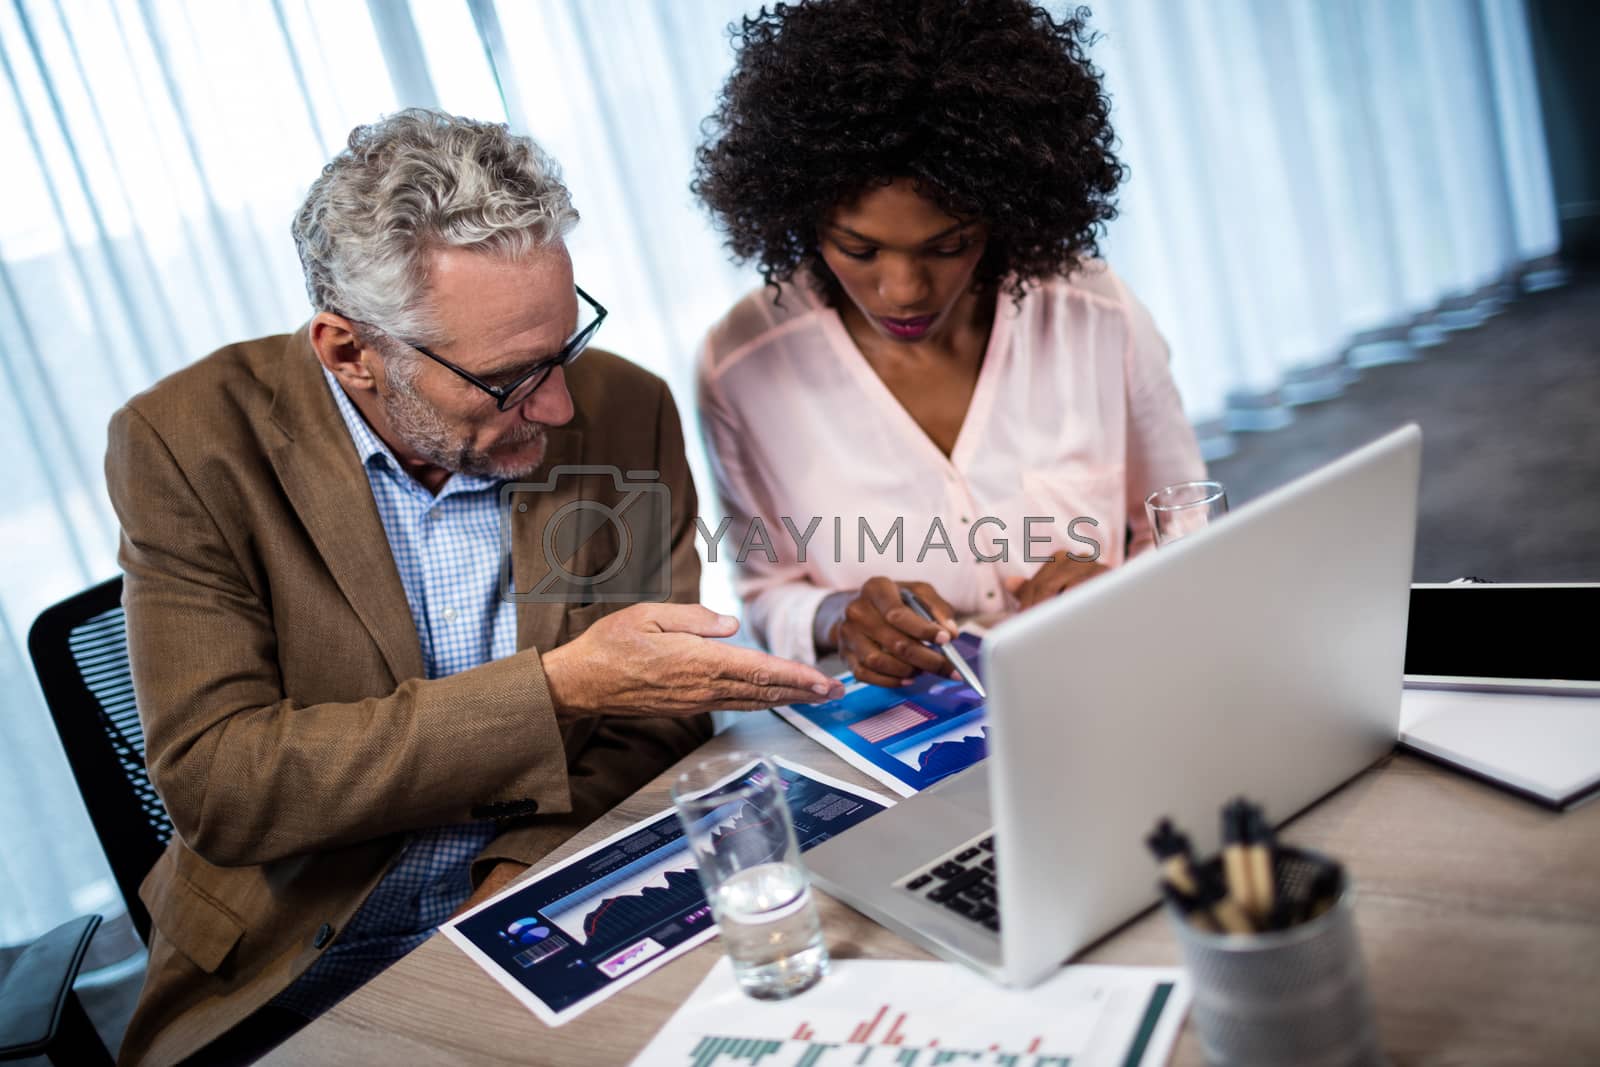 Royalty free image of Two businessmen working on a computer by Wavebreakmedia